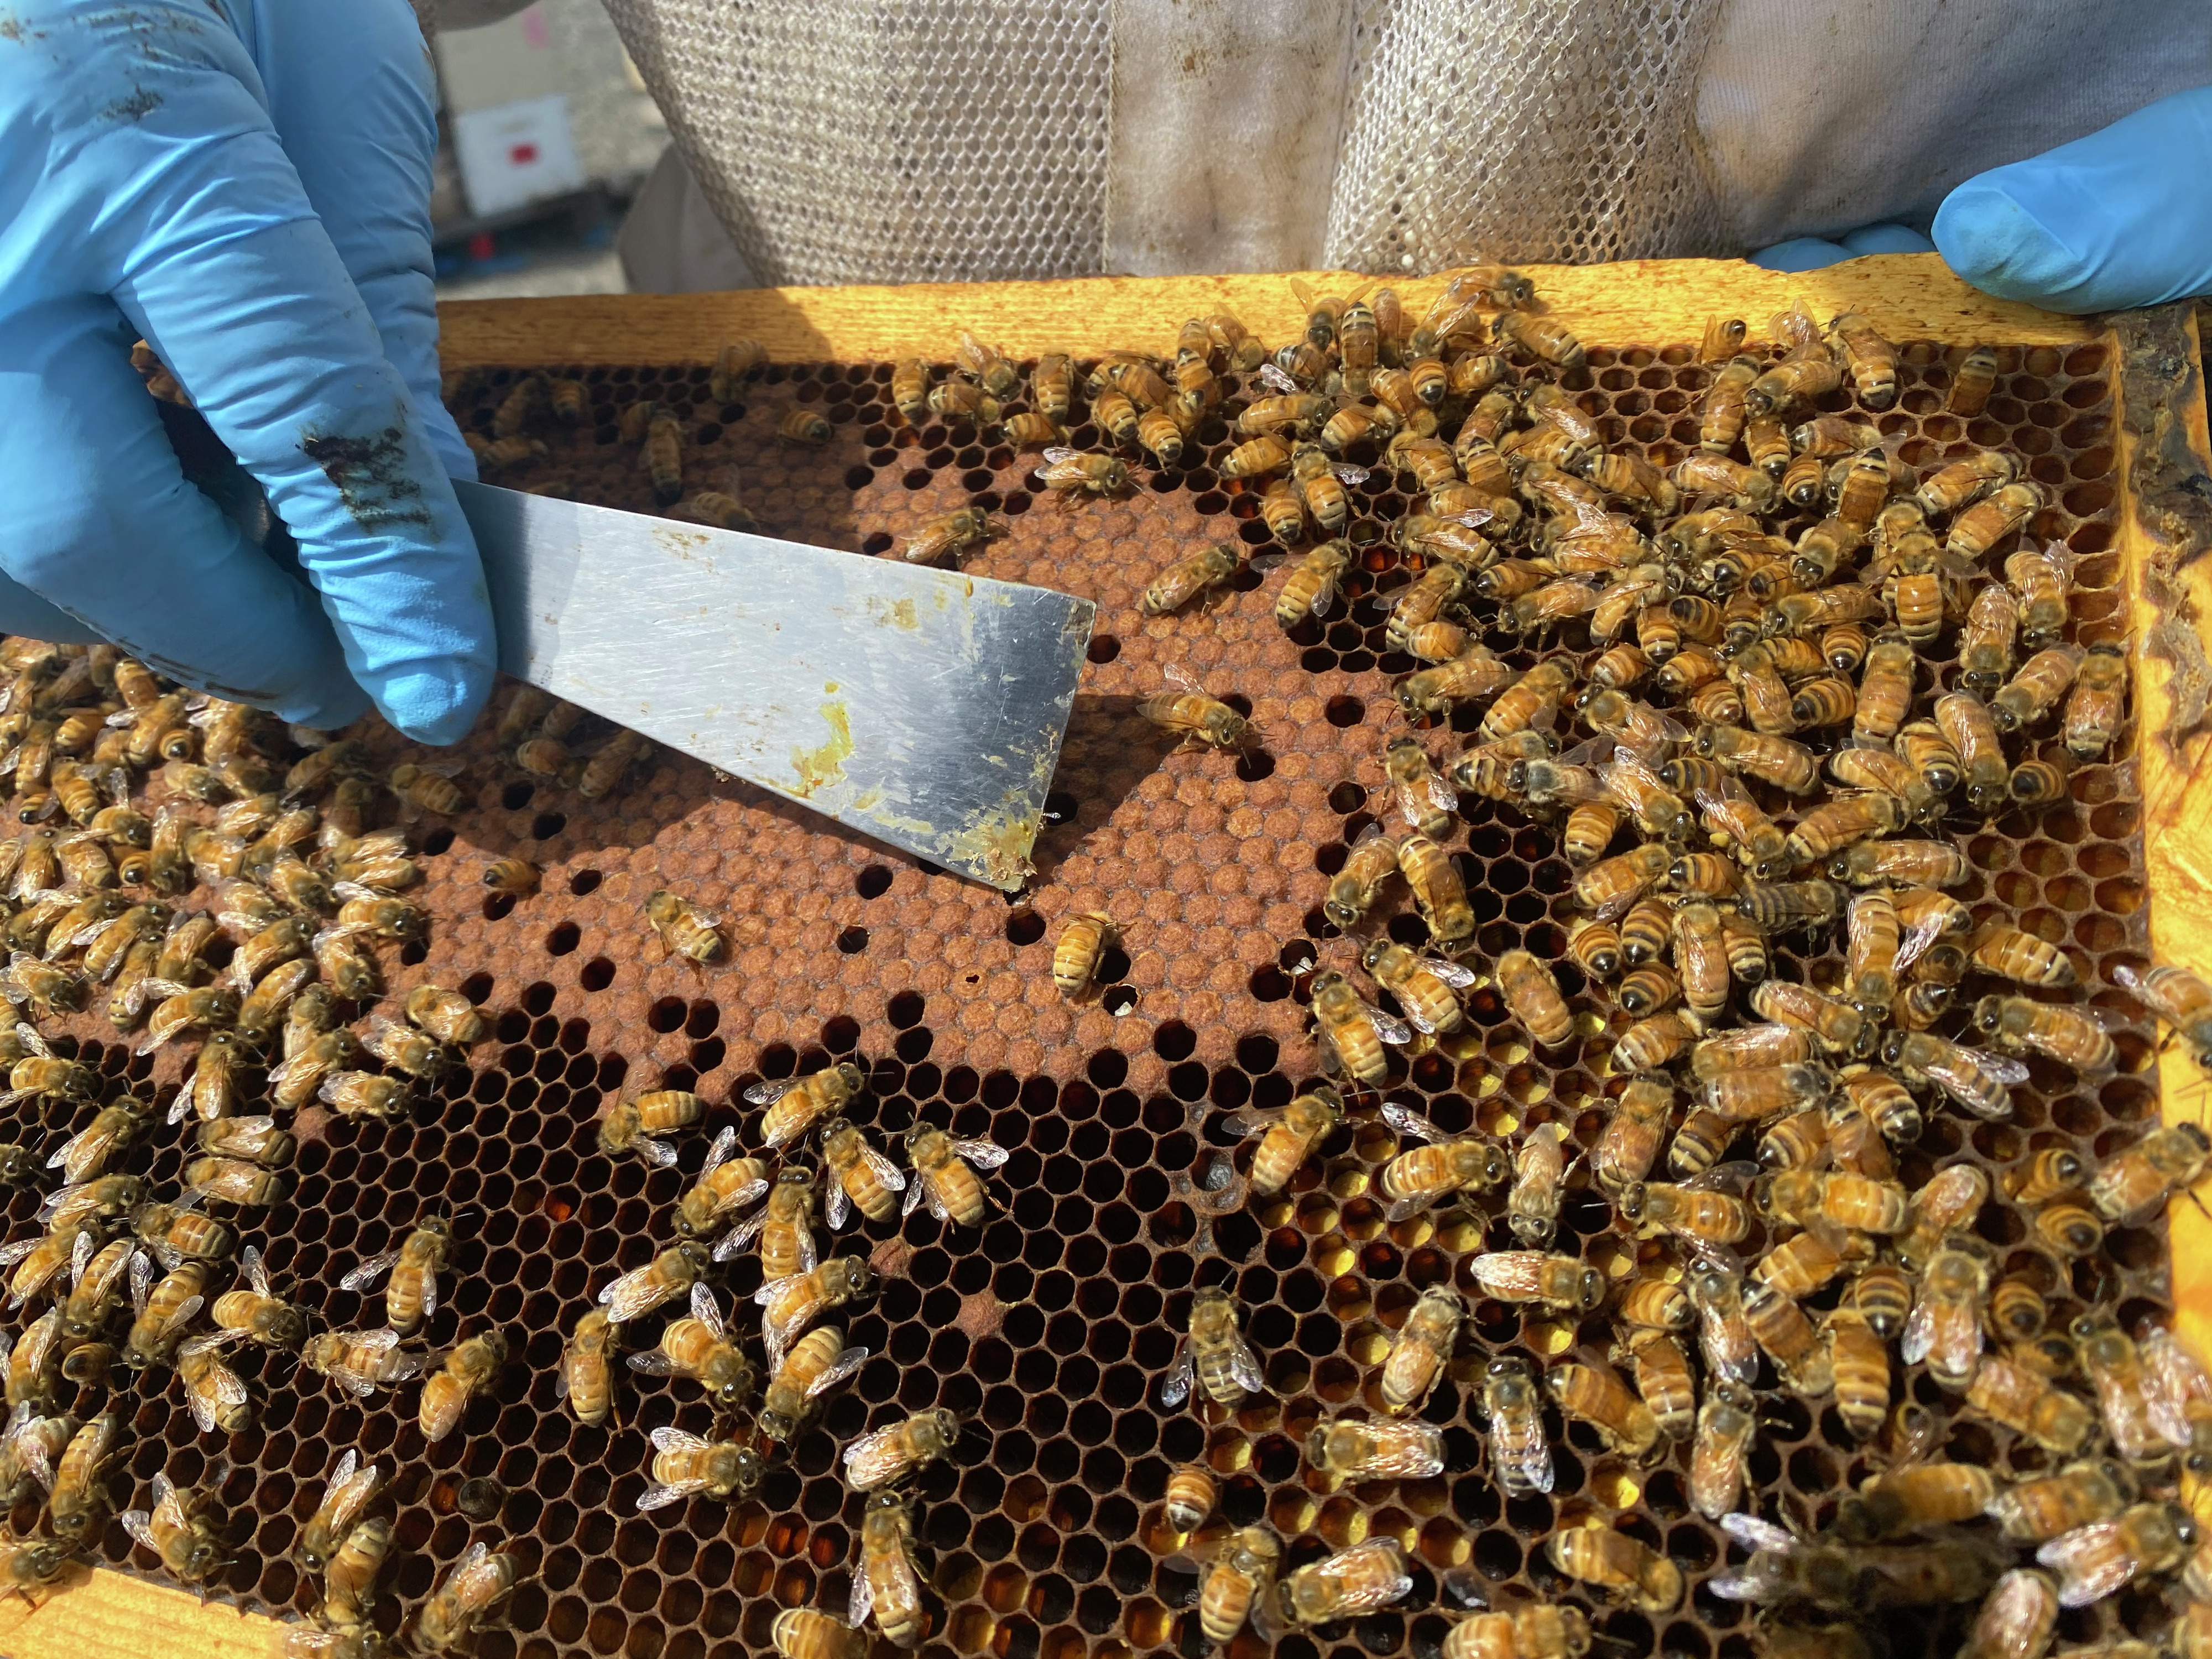 How a glut of California almonds could mean fewer Northwest honeybees